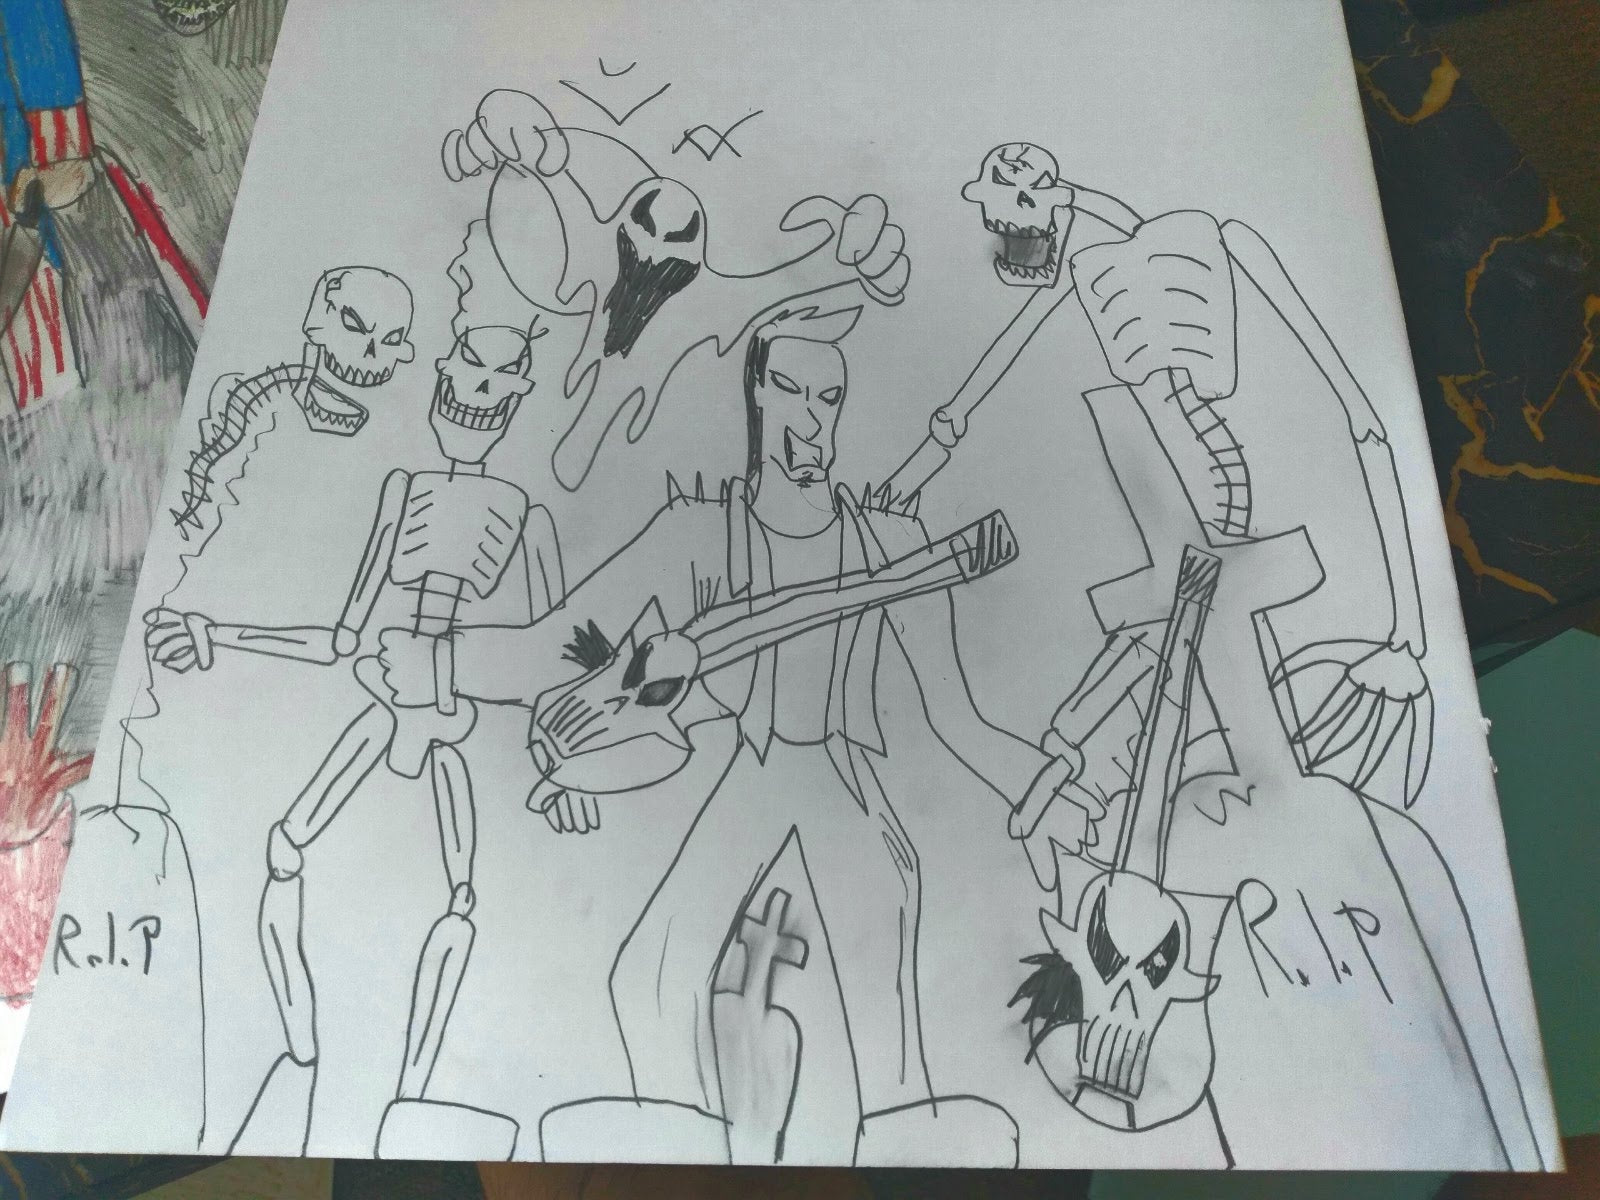 a pencil drawing on white paper, photographed against a stack of other drawings. The image shows a figure holding a skull-and-bones shaped guitar standing in the center of the picture, surrounded by skeletons and ghosts and bats. There are several gravestones with "RIP" written across their surfaces scattered around the ground. The characters all seem to be smiling and cackling with evil grins, and posed like members of a metal band.